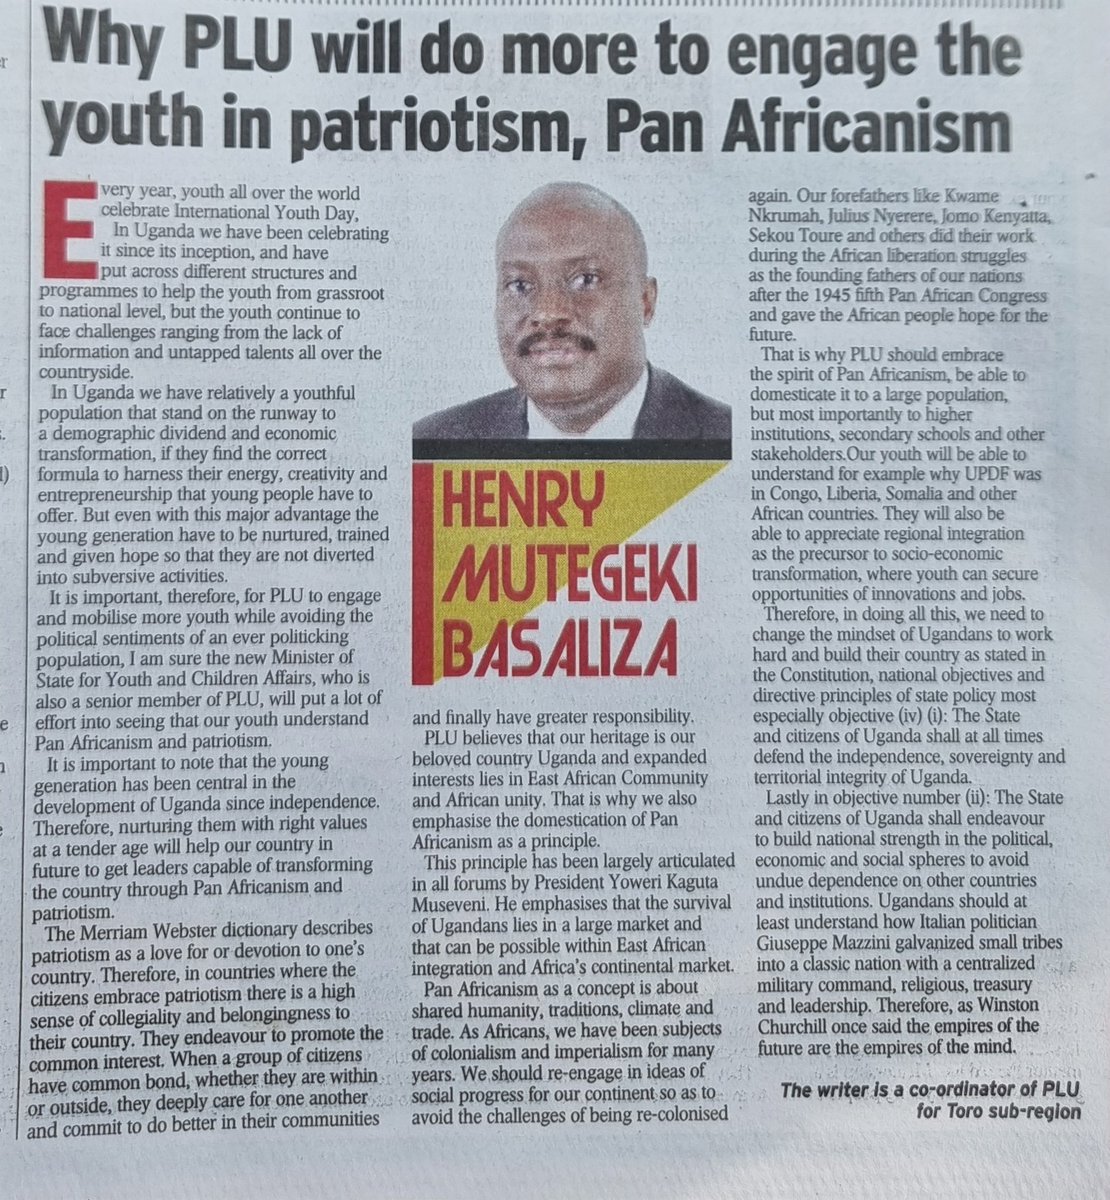 PLU has a big role to play in our country. Now that we have our very own in the youth Docket Hon @BalaamAteenyiDr, the youth will be fully engaged in patriotism and Pan Africanism. Get a copy of today's new vision as I break it down.